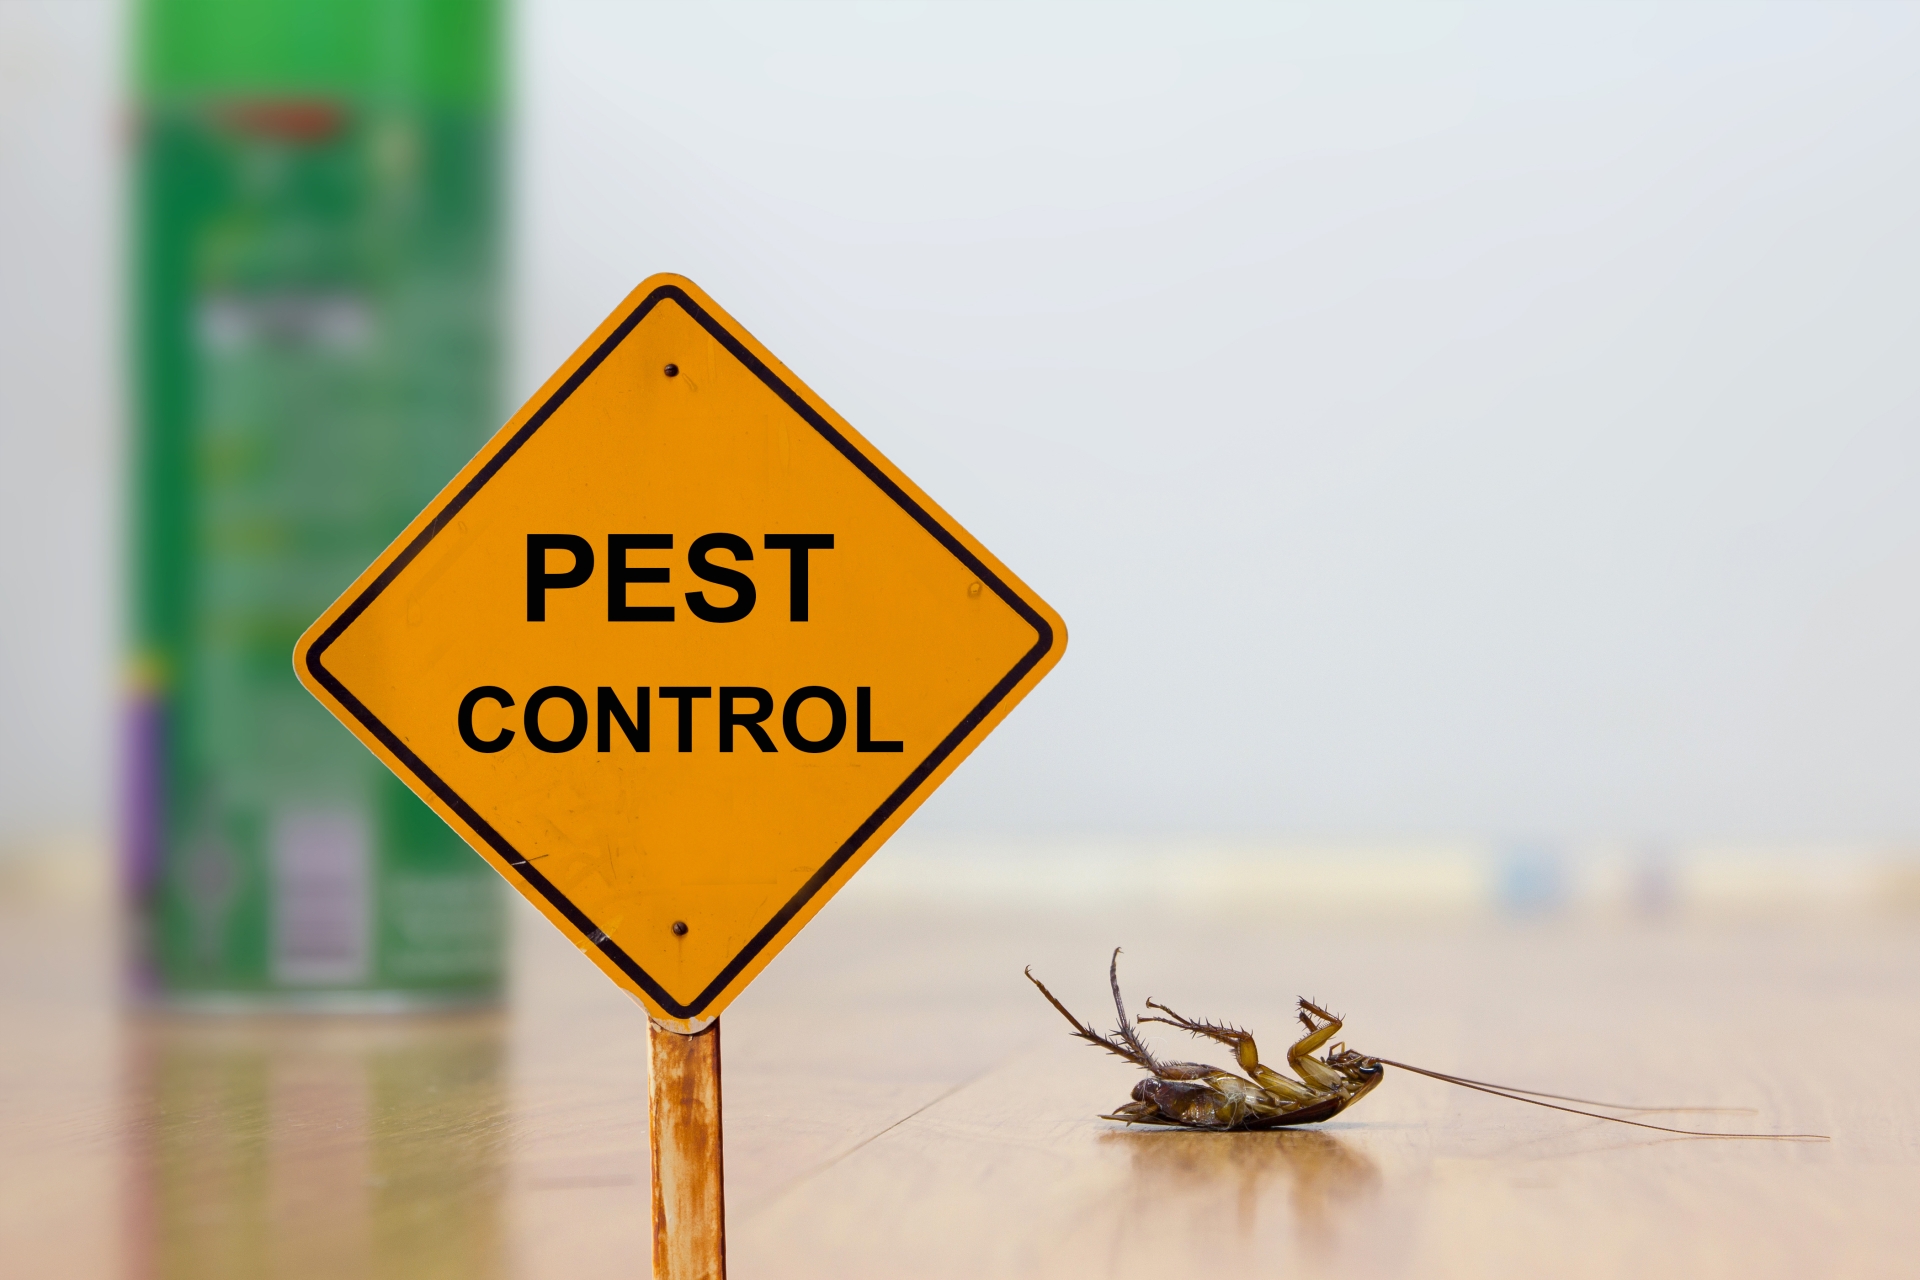 24 Hour Pest Control, Pest Control in Hammersmith, W6. Call Now 020 8166 9746